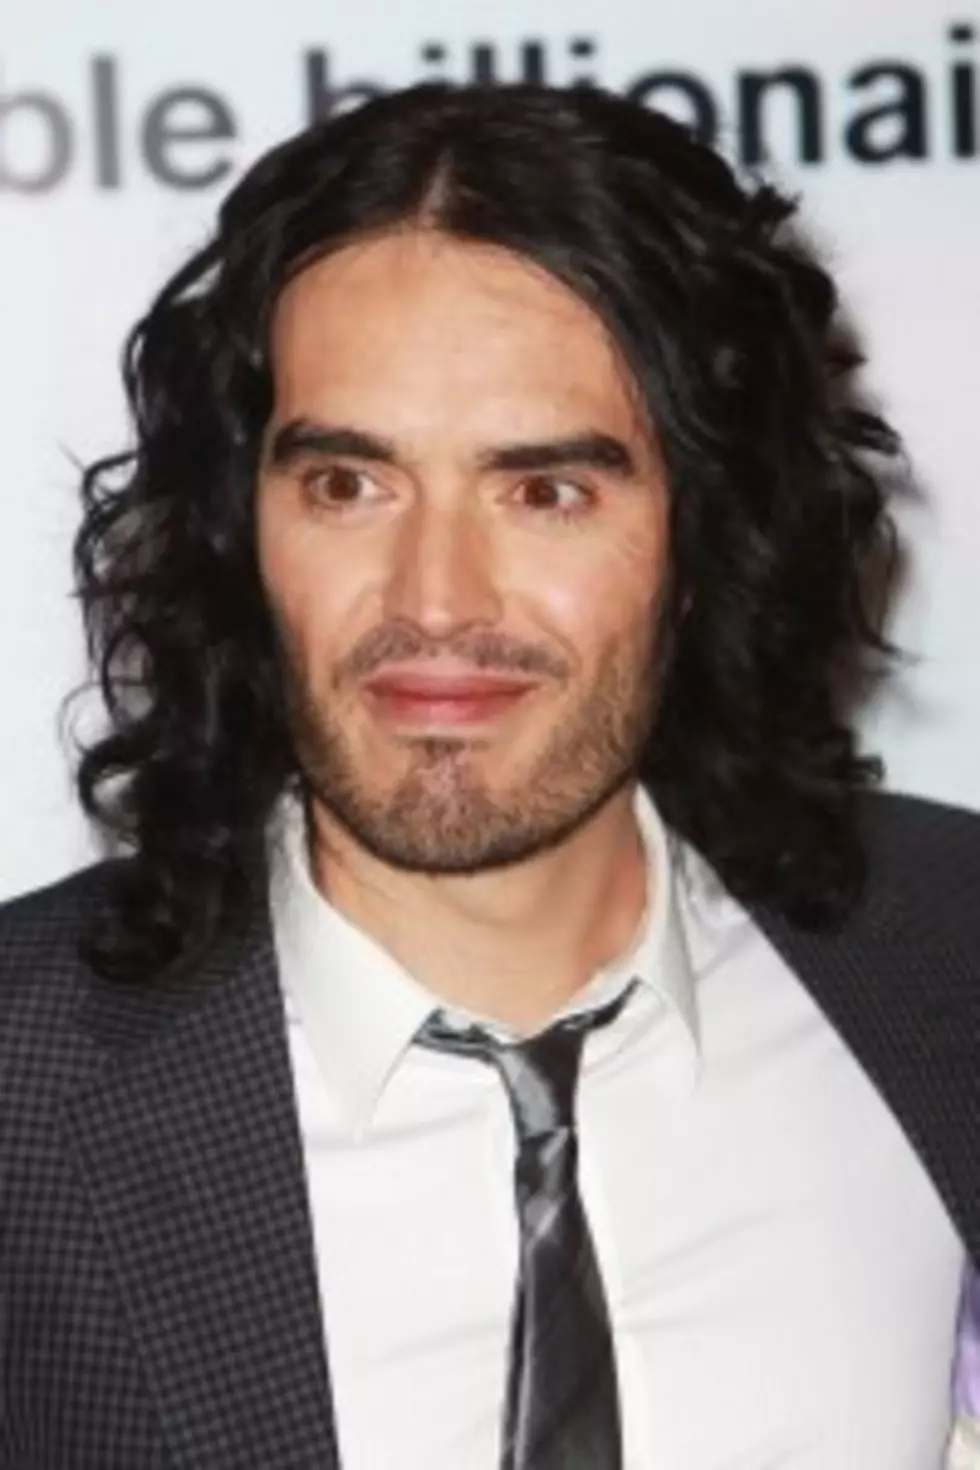 Top Comic Russell Brand Deported From Japan